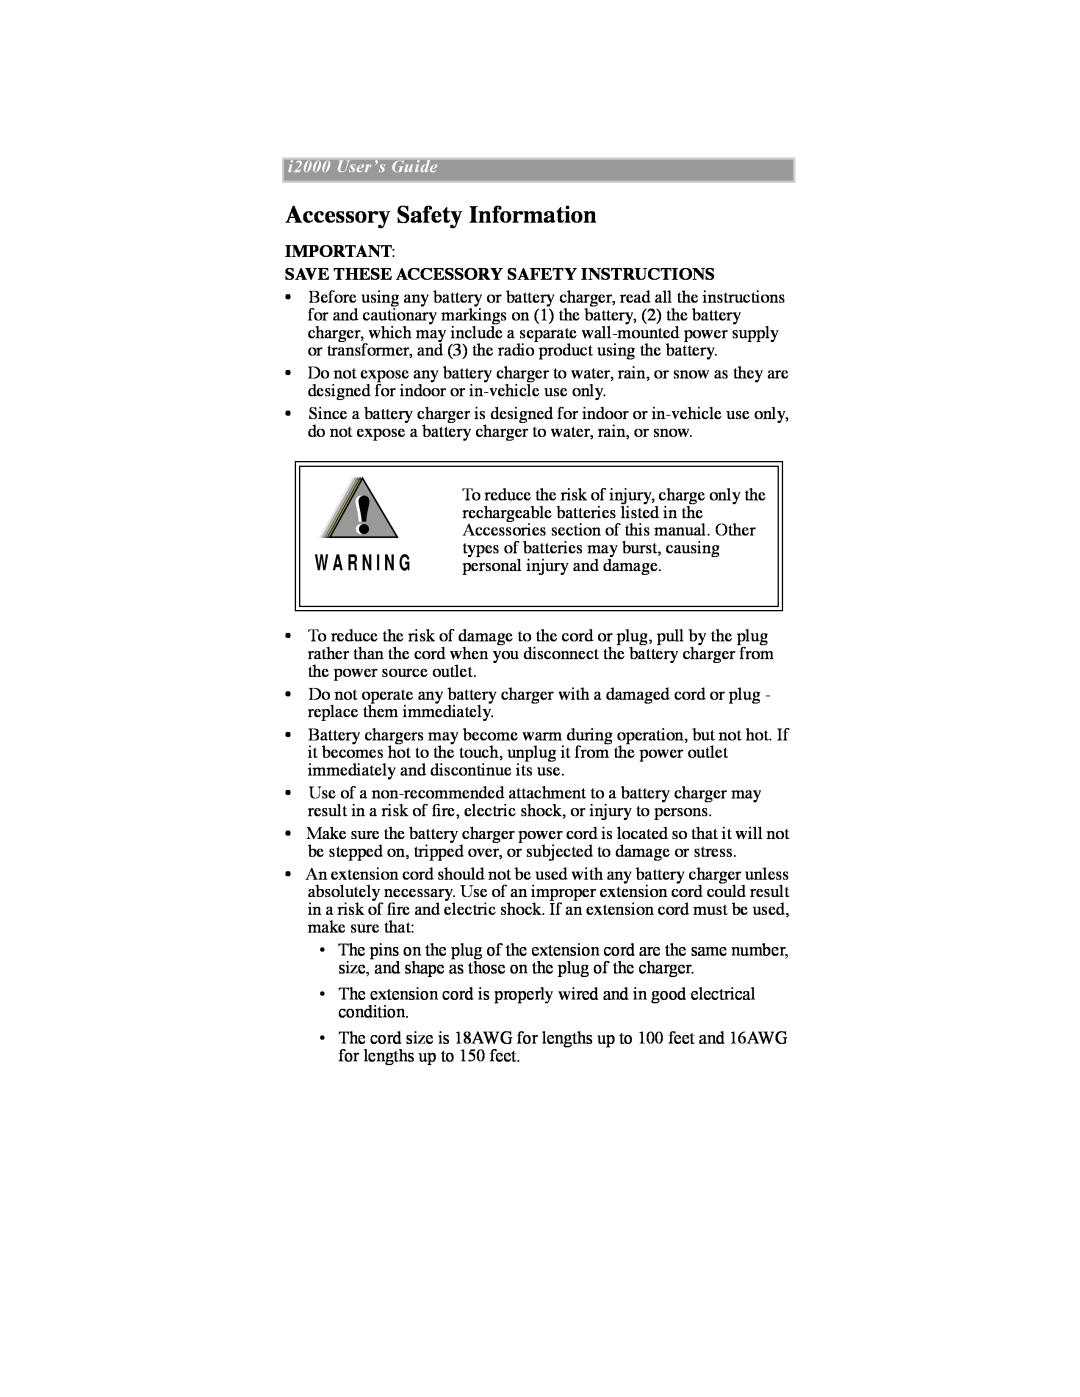 Motorola iDEN Accessory Safety Information, W A R N I N G, Save These Accessory Safety Instructions, i2000 UserÕs Guide 